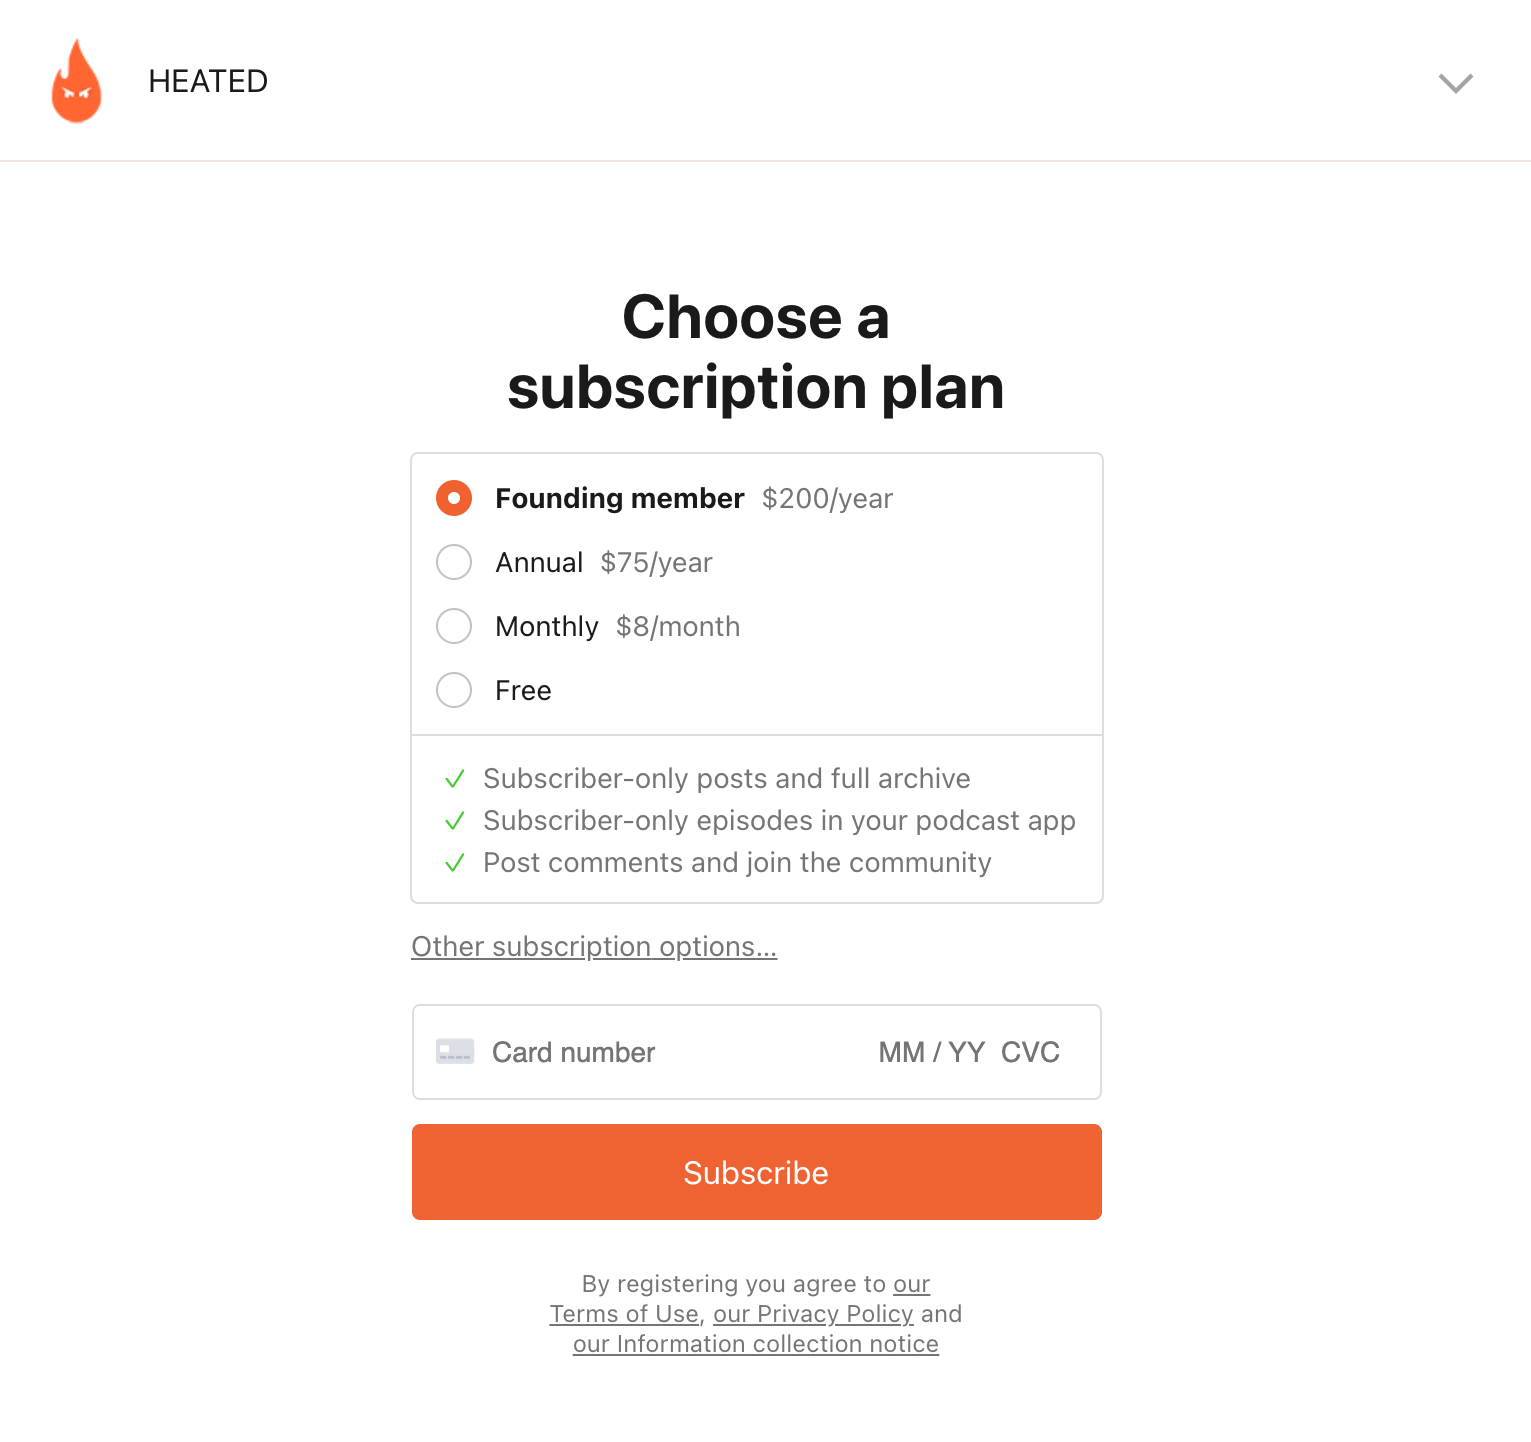 Heated paid newsletter subscription options